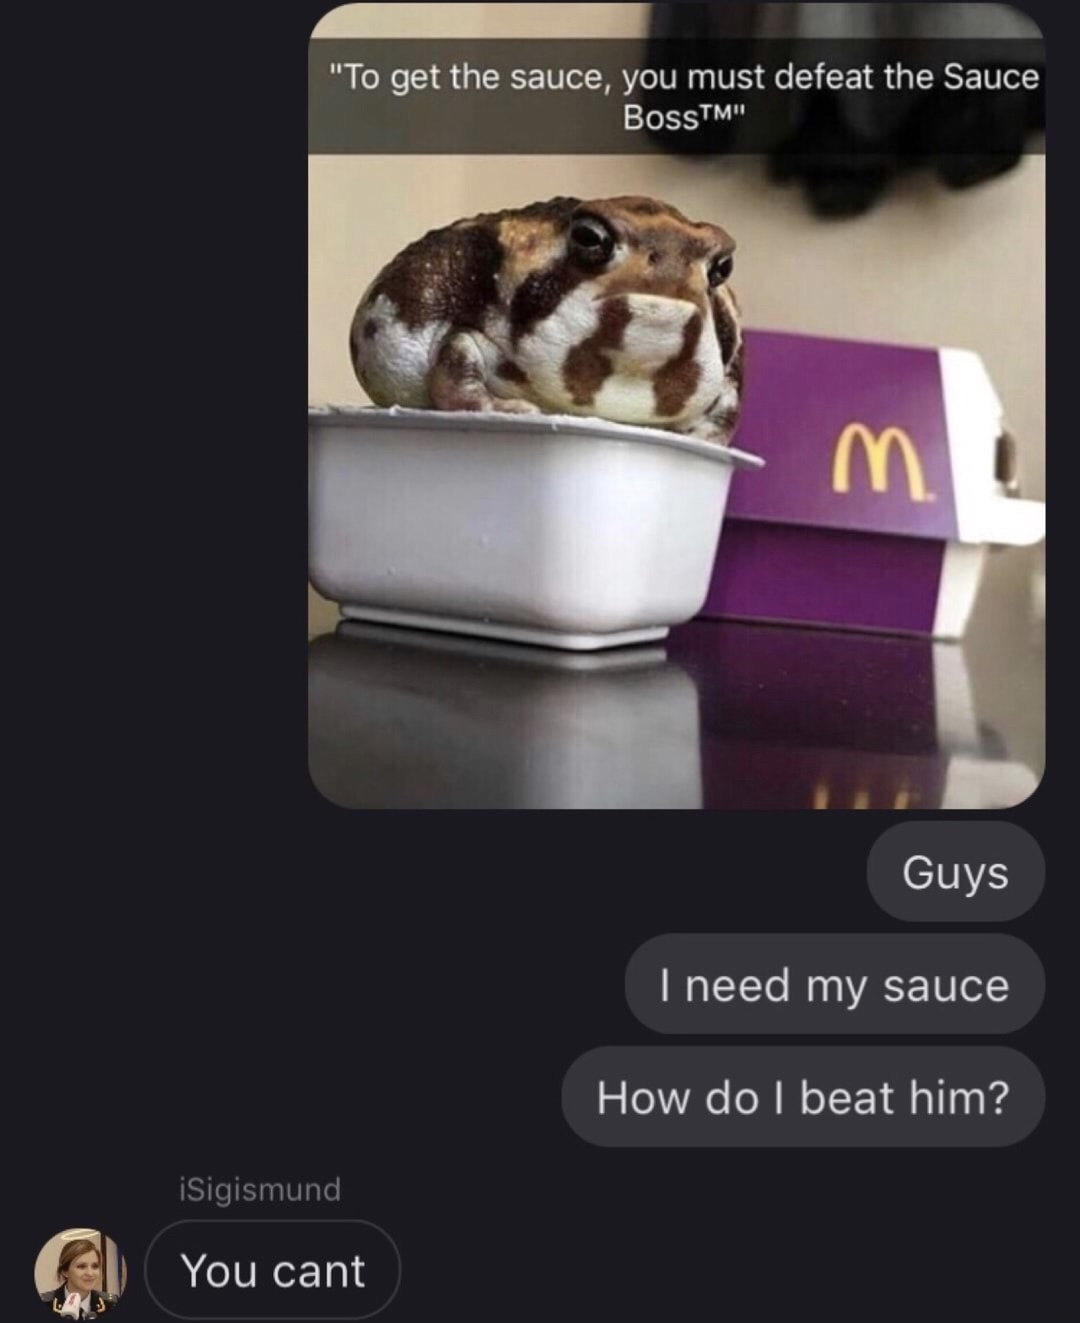 meme get the sauce you must defeat - "To get the sauce, you must defeat the Sauce BossTM" Guys I need my sauce 'How do I beat him? iSigismund You can You cant